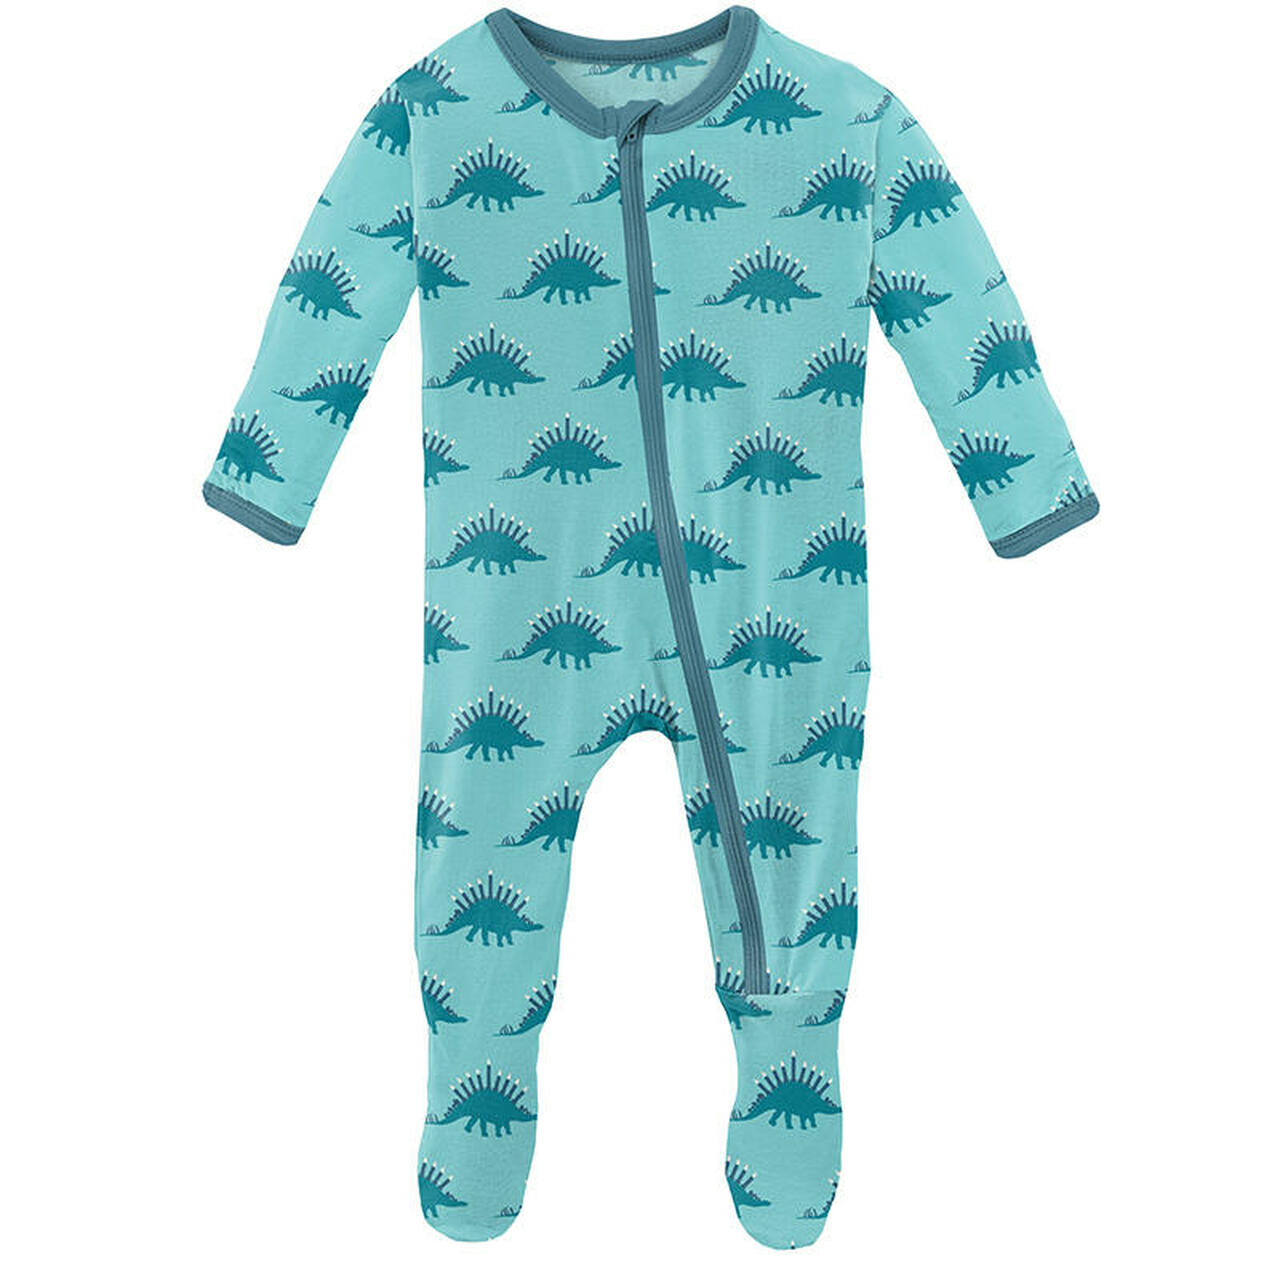 Boy's Print Footie with Zipper - Iceberg Menorahsaurus - KicKee Pants-I Footie-Graceful & Chic Boutique, Family Clothing Store in Waxahachie, Texas